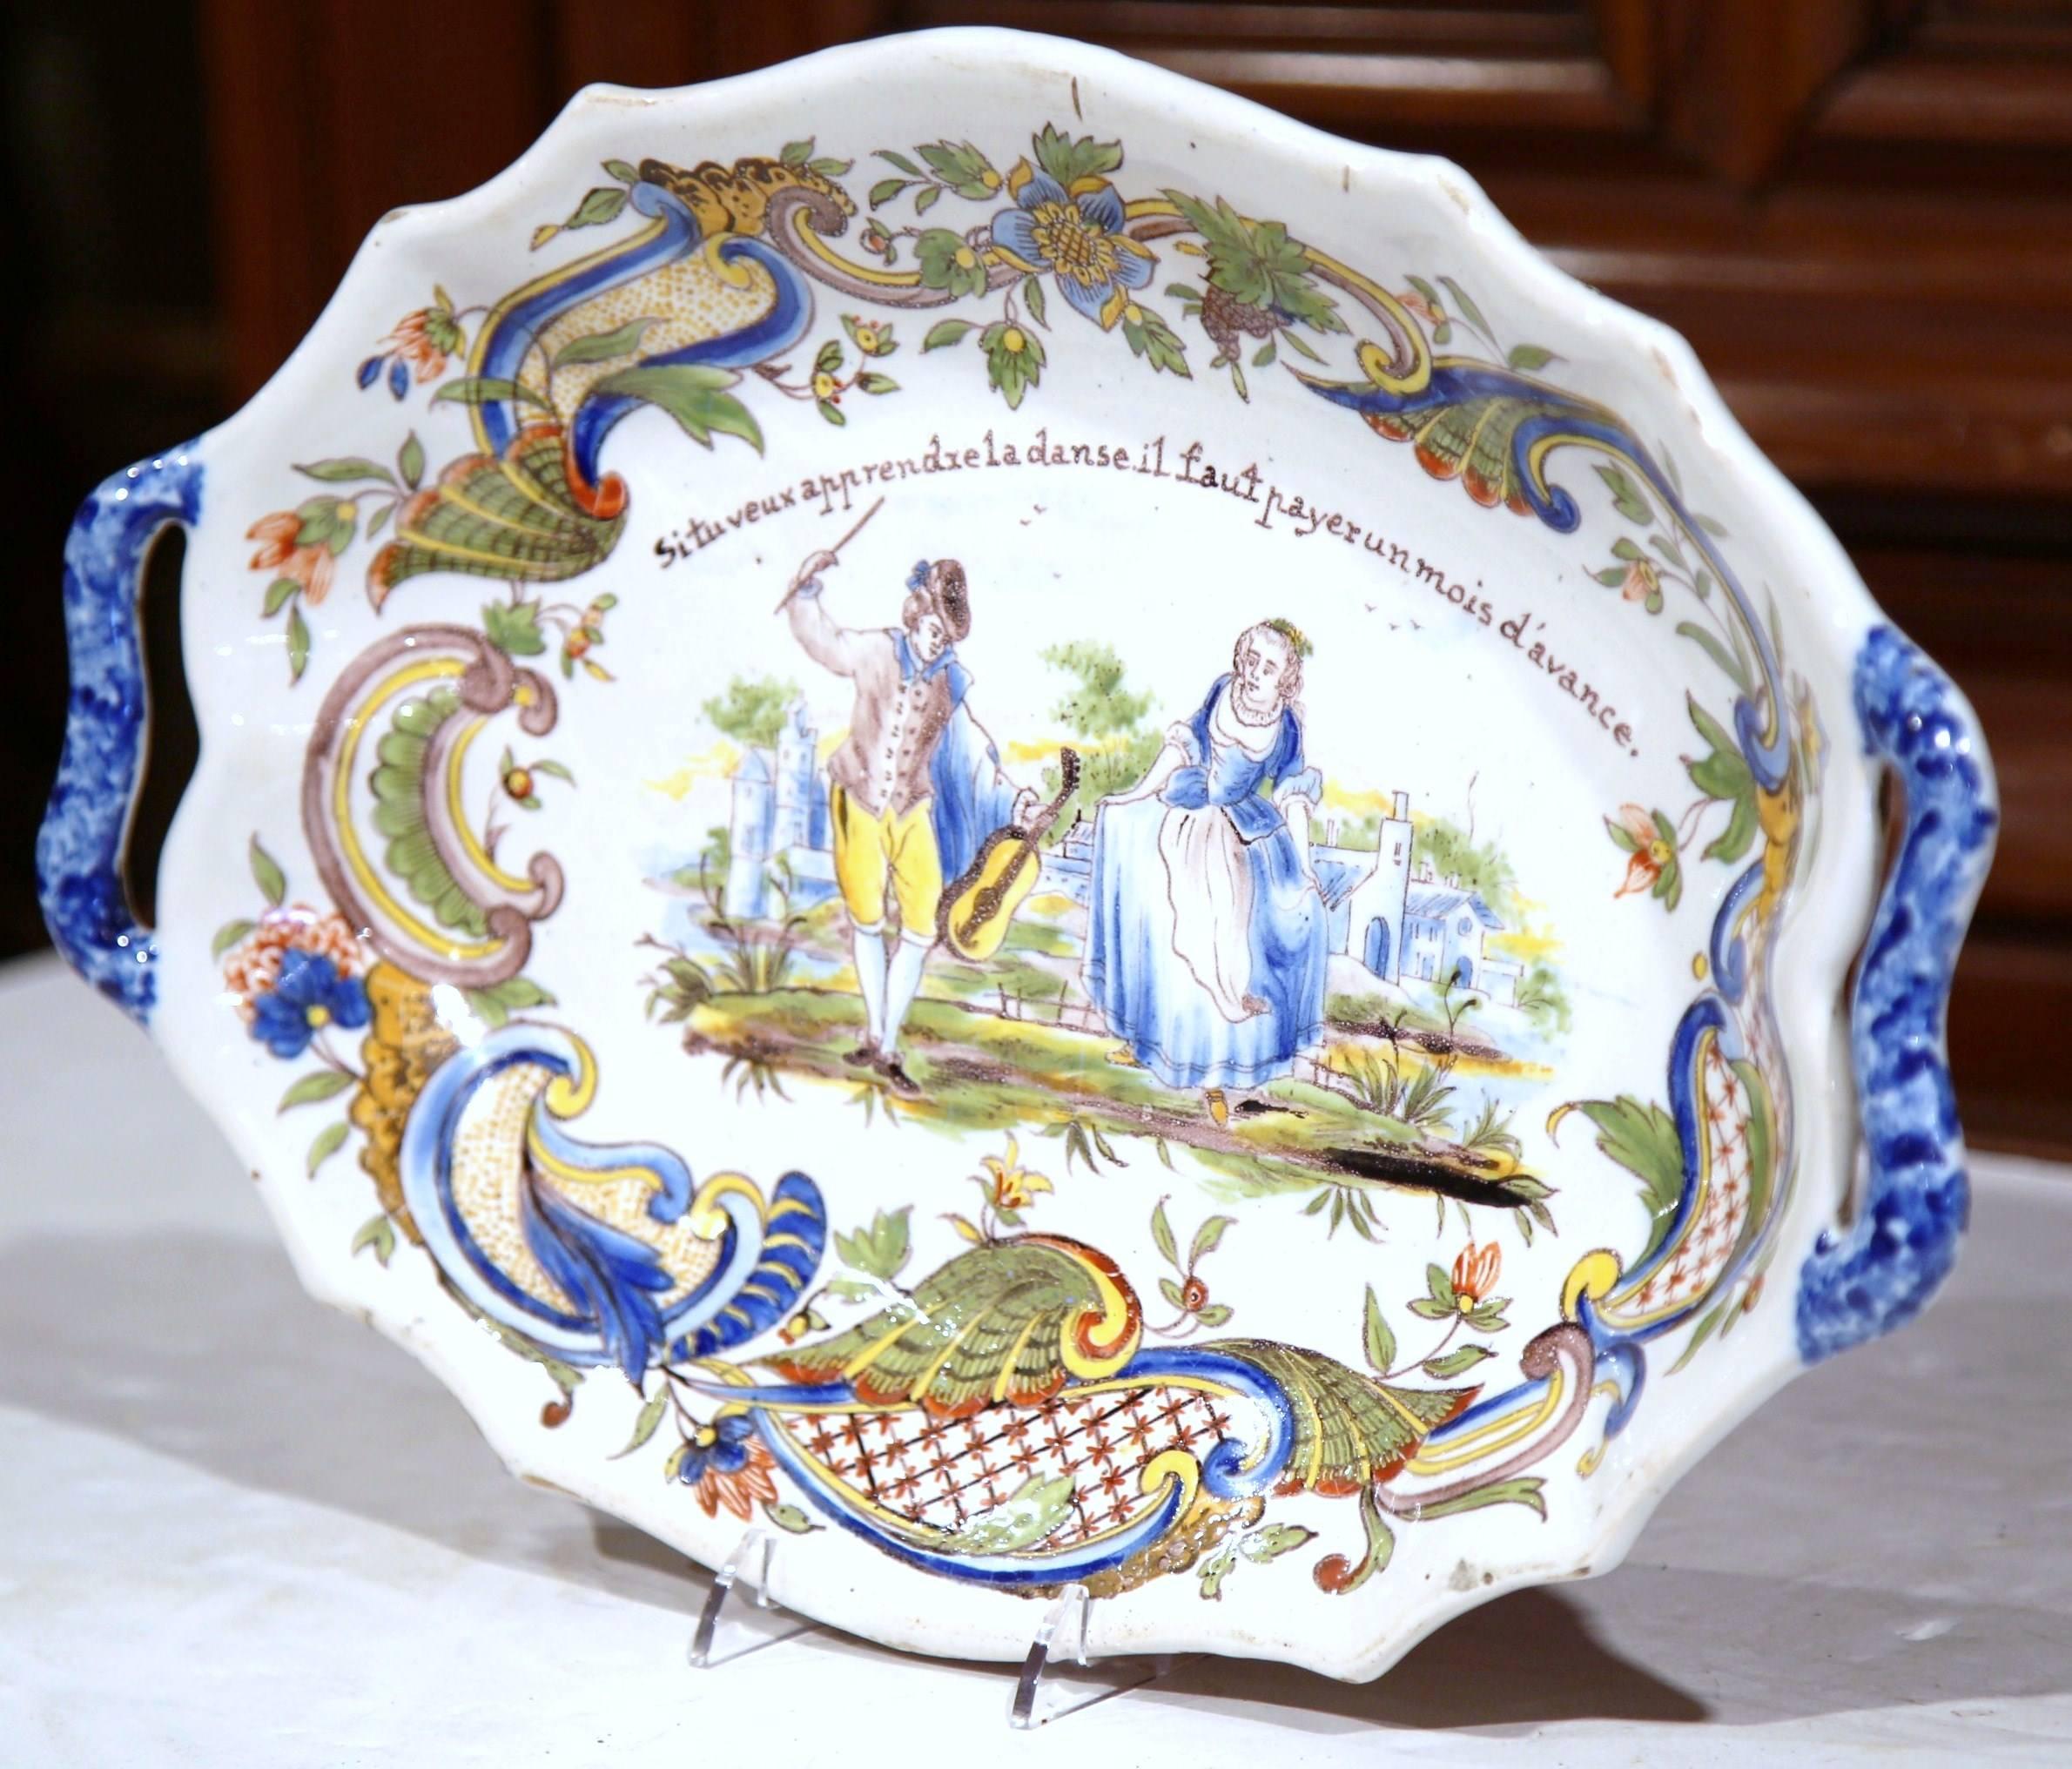 This beautiful antique ceramic dish was crafted in Normandy, France, circa 1880. The stylized ceramic plate has a scalloped edge and depicts a hand painted courting scene with a violinist teaching a young woman how to dance. The French motto reads: